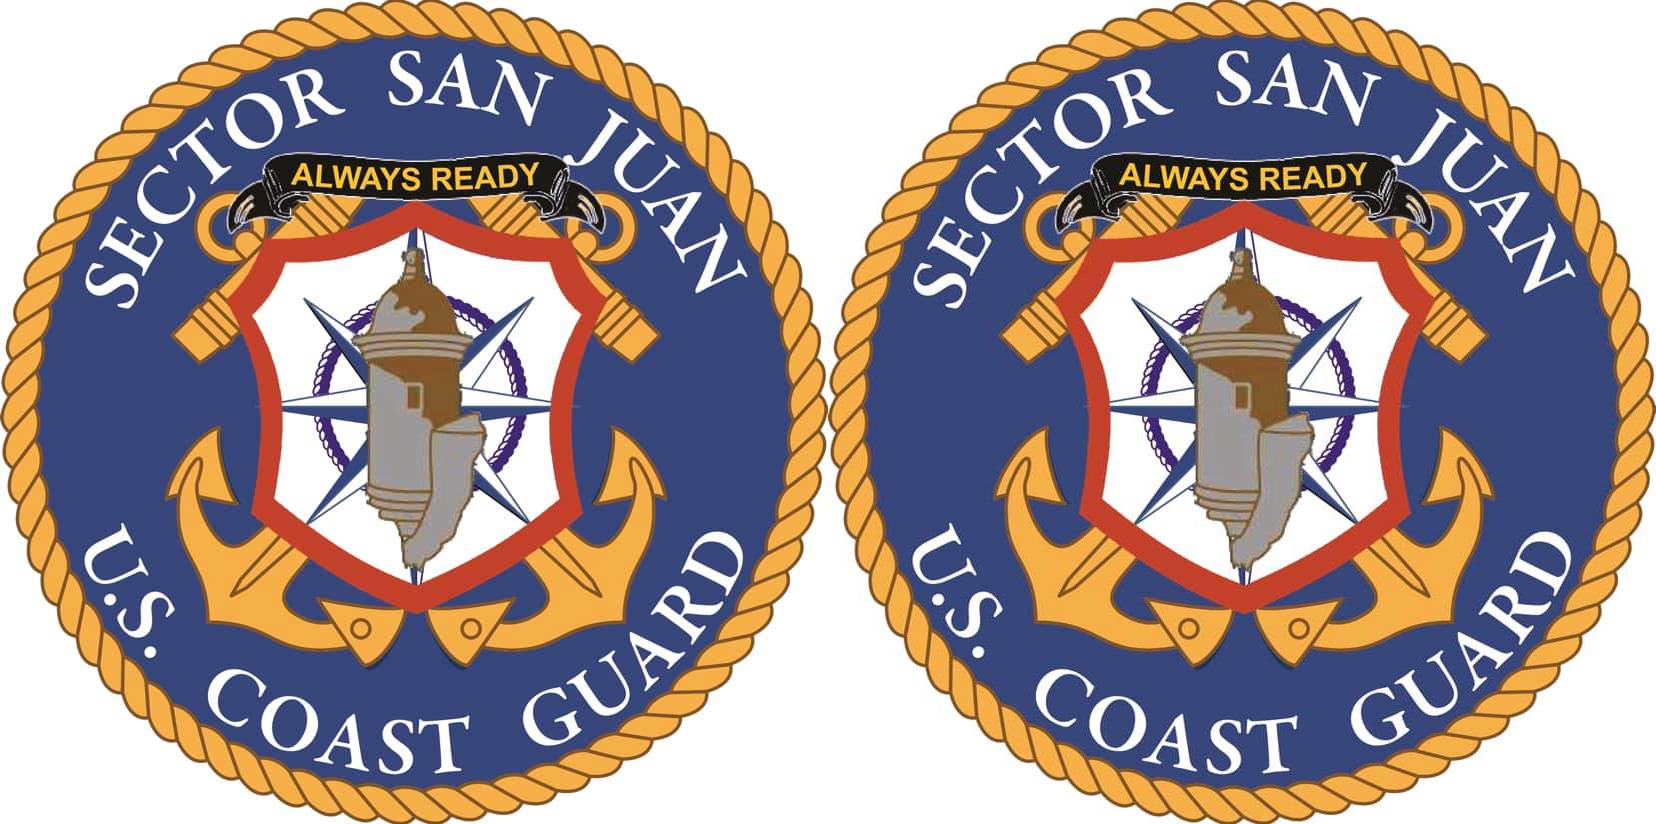 Coast Guard Reopens Maritime Ports In The U.S. Virgin Islands And Puerto Rico